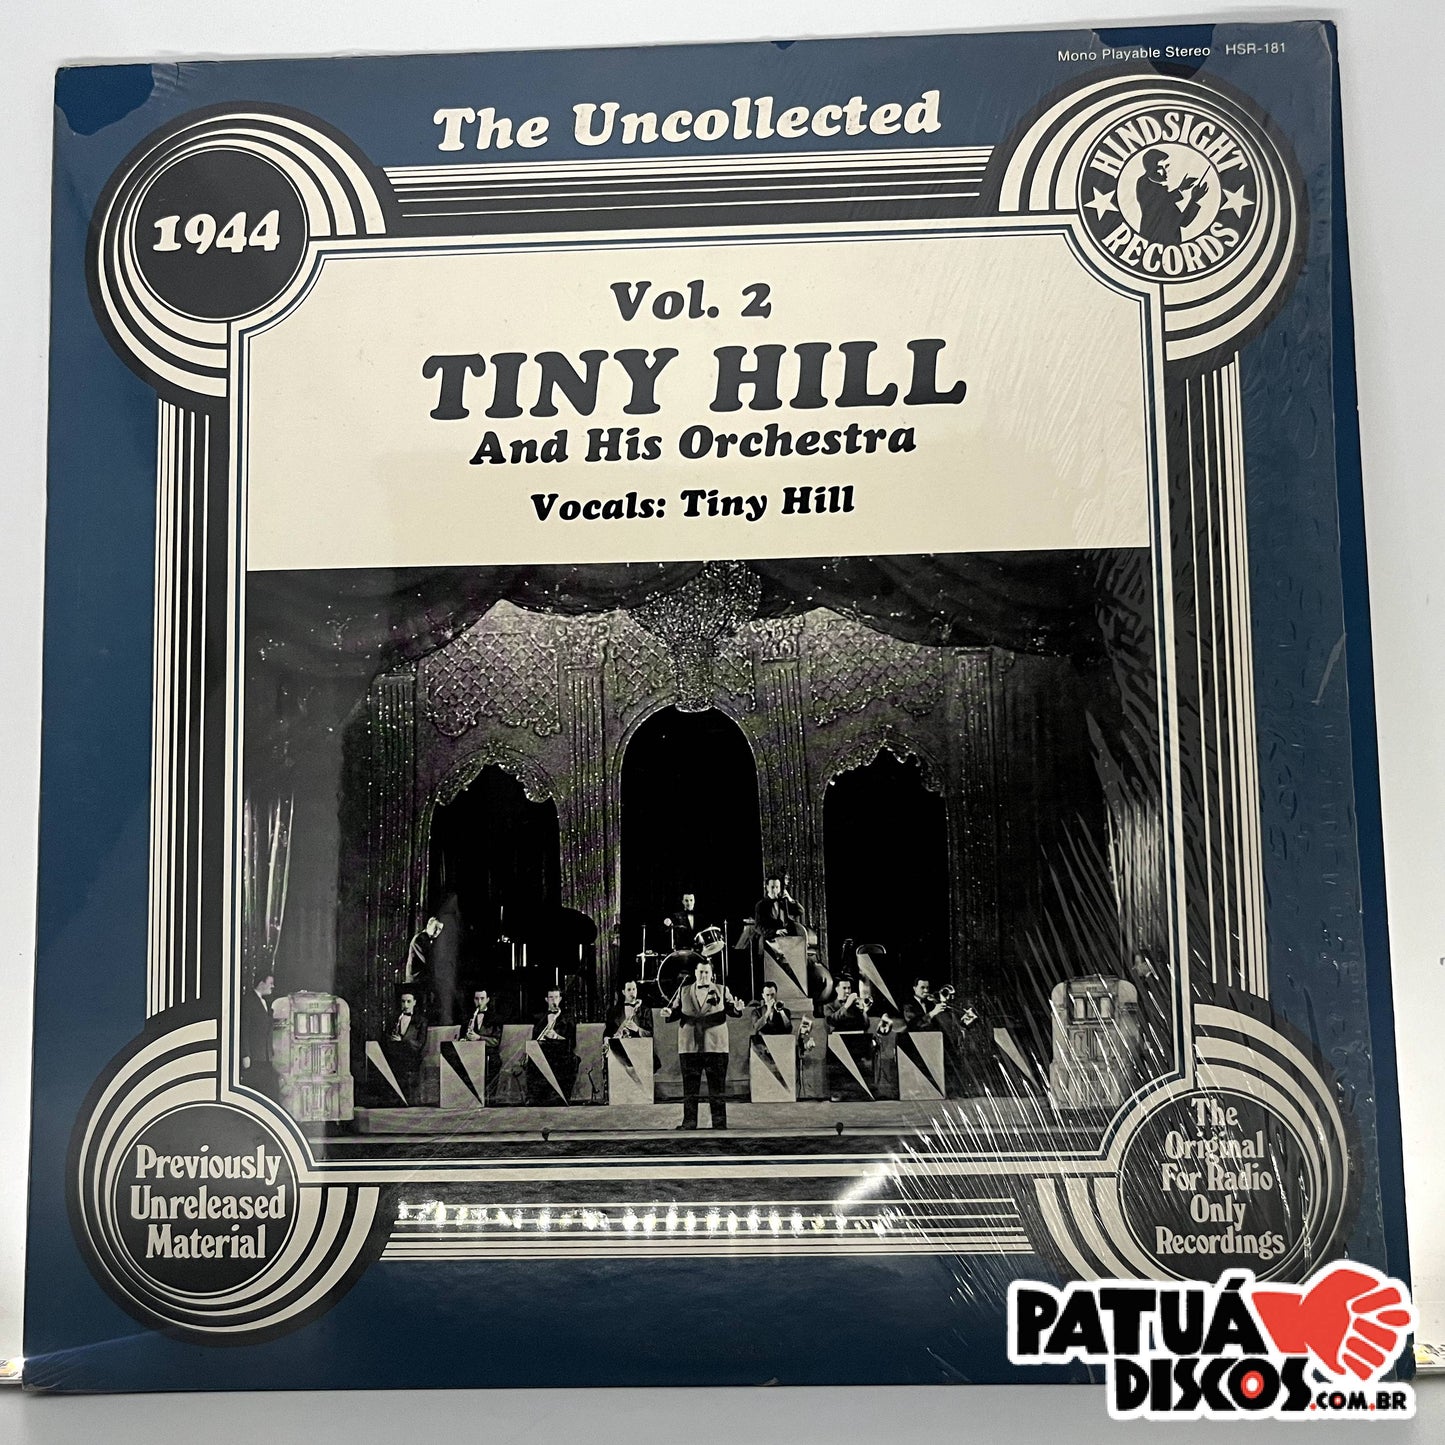 Tiny Hill And His Orchestra - The Uncollected Vol. 2 - 1944 - LP